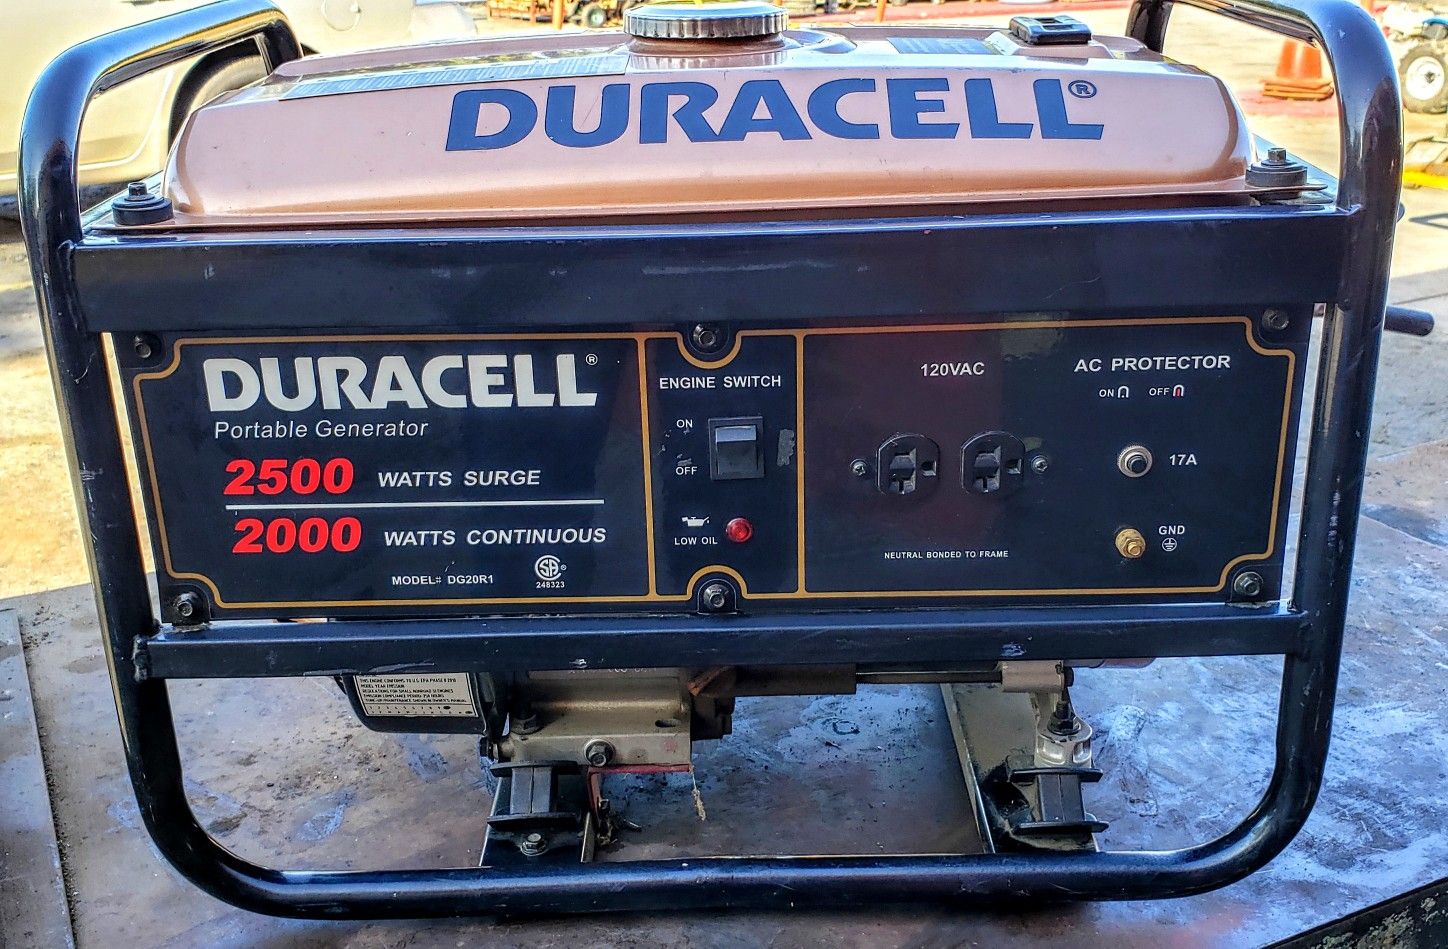 2000 watts Generator Made by Duracell